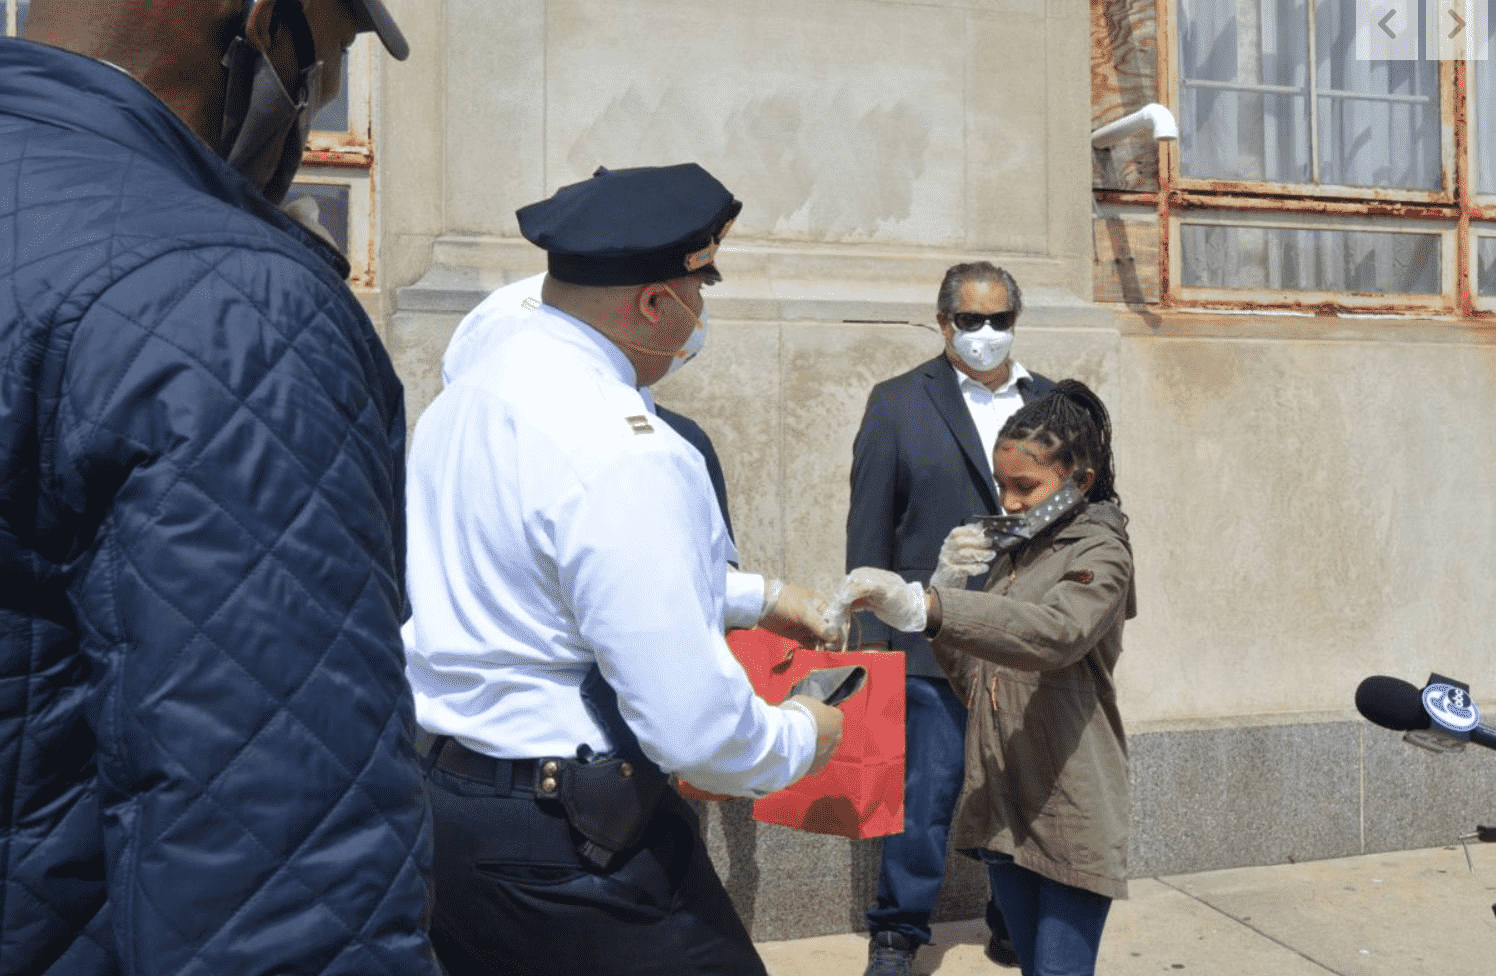 Read more about the article Community presents NW Philly Police District with 1400 face masks (Philadelphia Tribune)